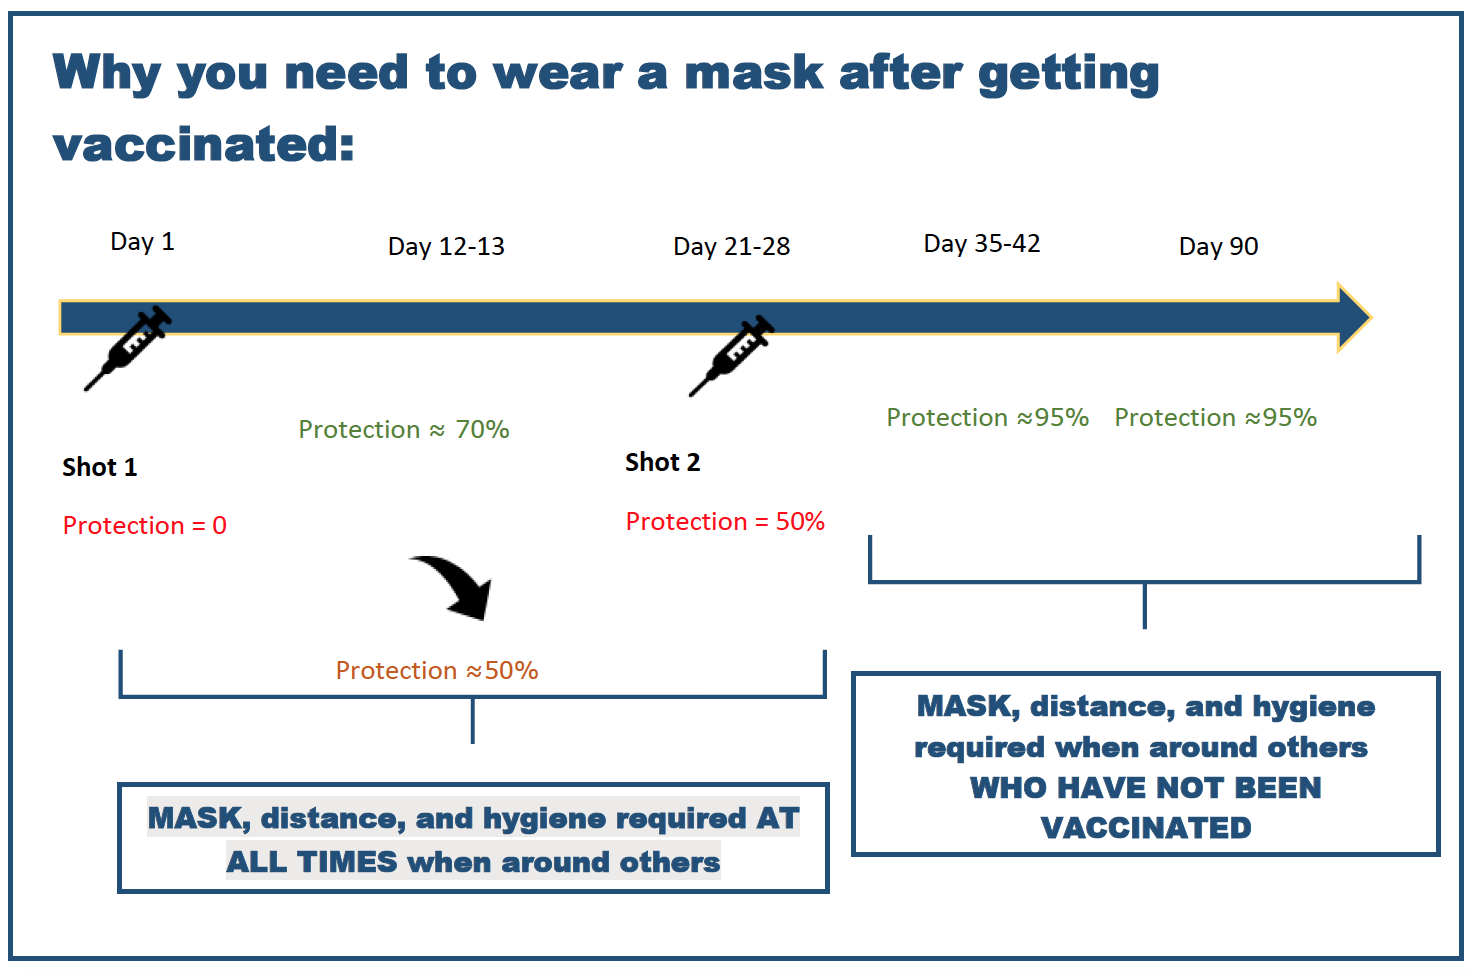 Timeline showing why you need to wear a mask after getting vaccinated